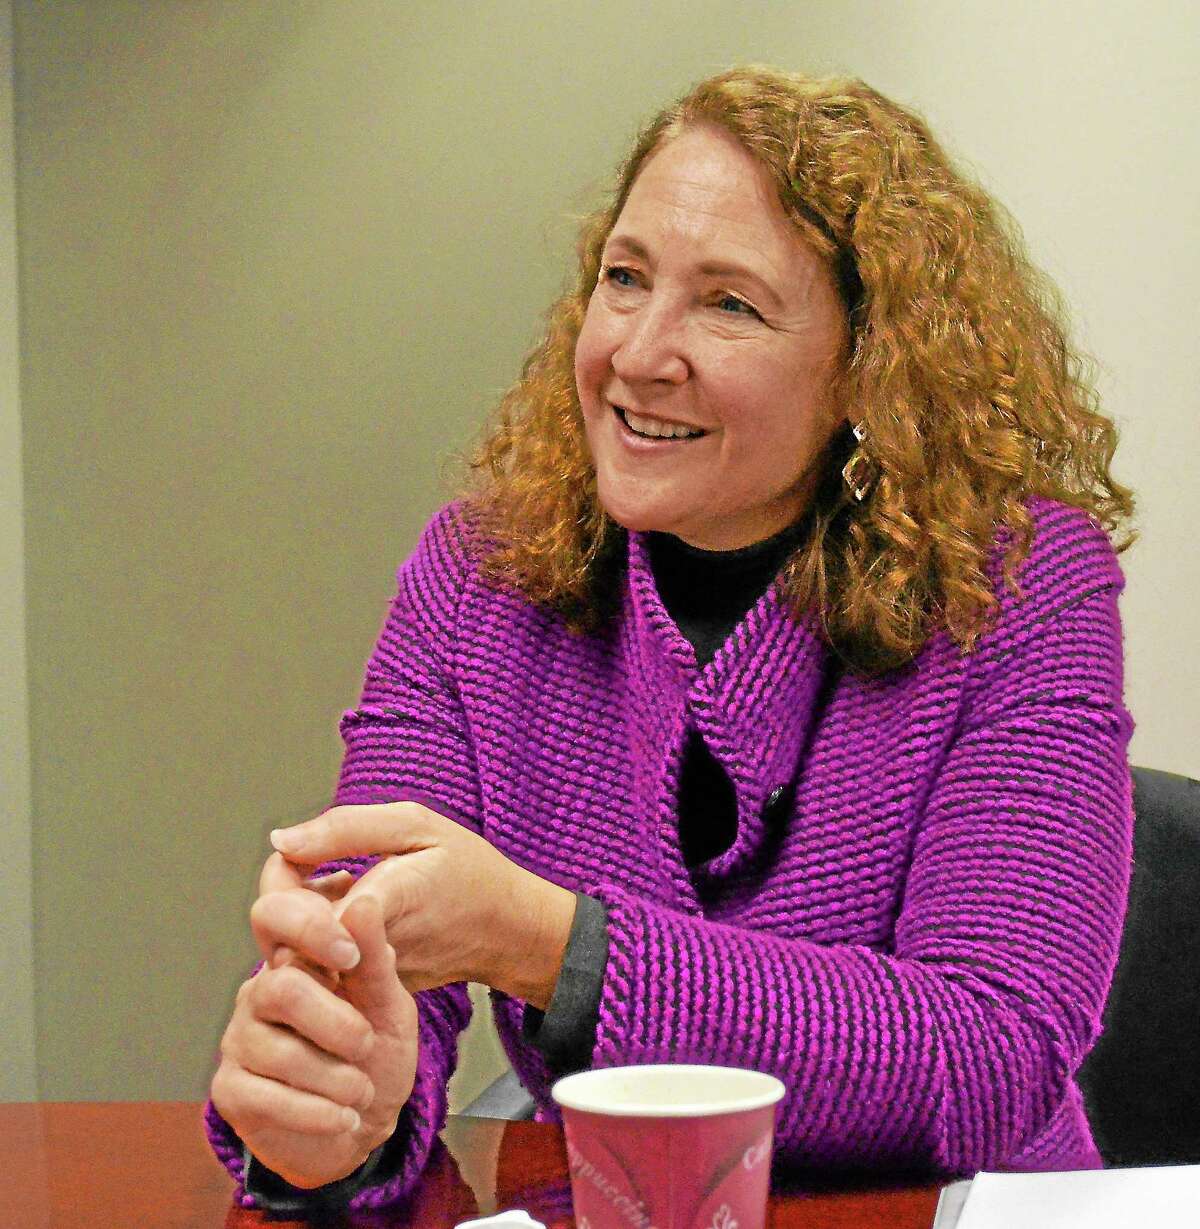 Elisabeth Esty talks with Register Citizen editors, Dec. 5. Esty is among lawmakers who argue that the debt ceiling should be eliminated or significantly reformed. (John Berry - Register Citizen)